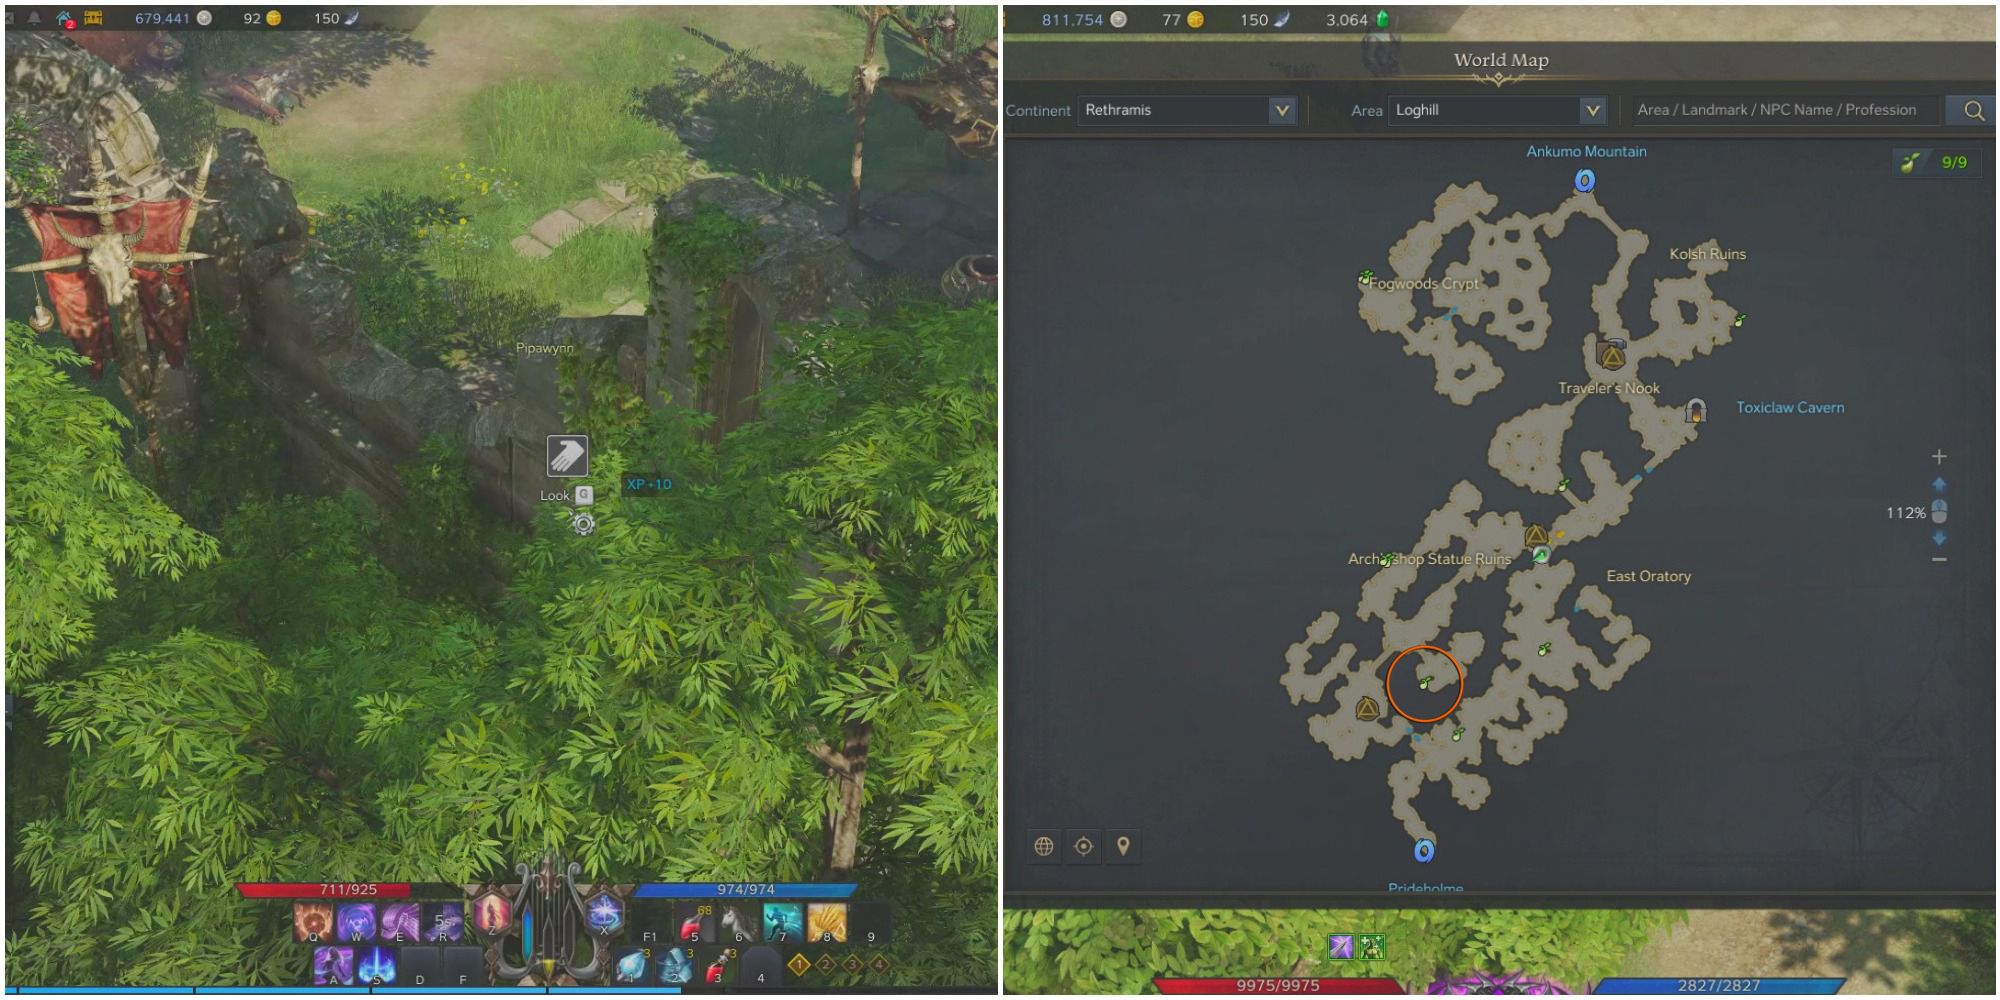 A split image of a bard hidden behind a ruin wall and a "look" icon, and a map of Loghill